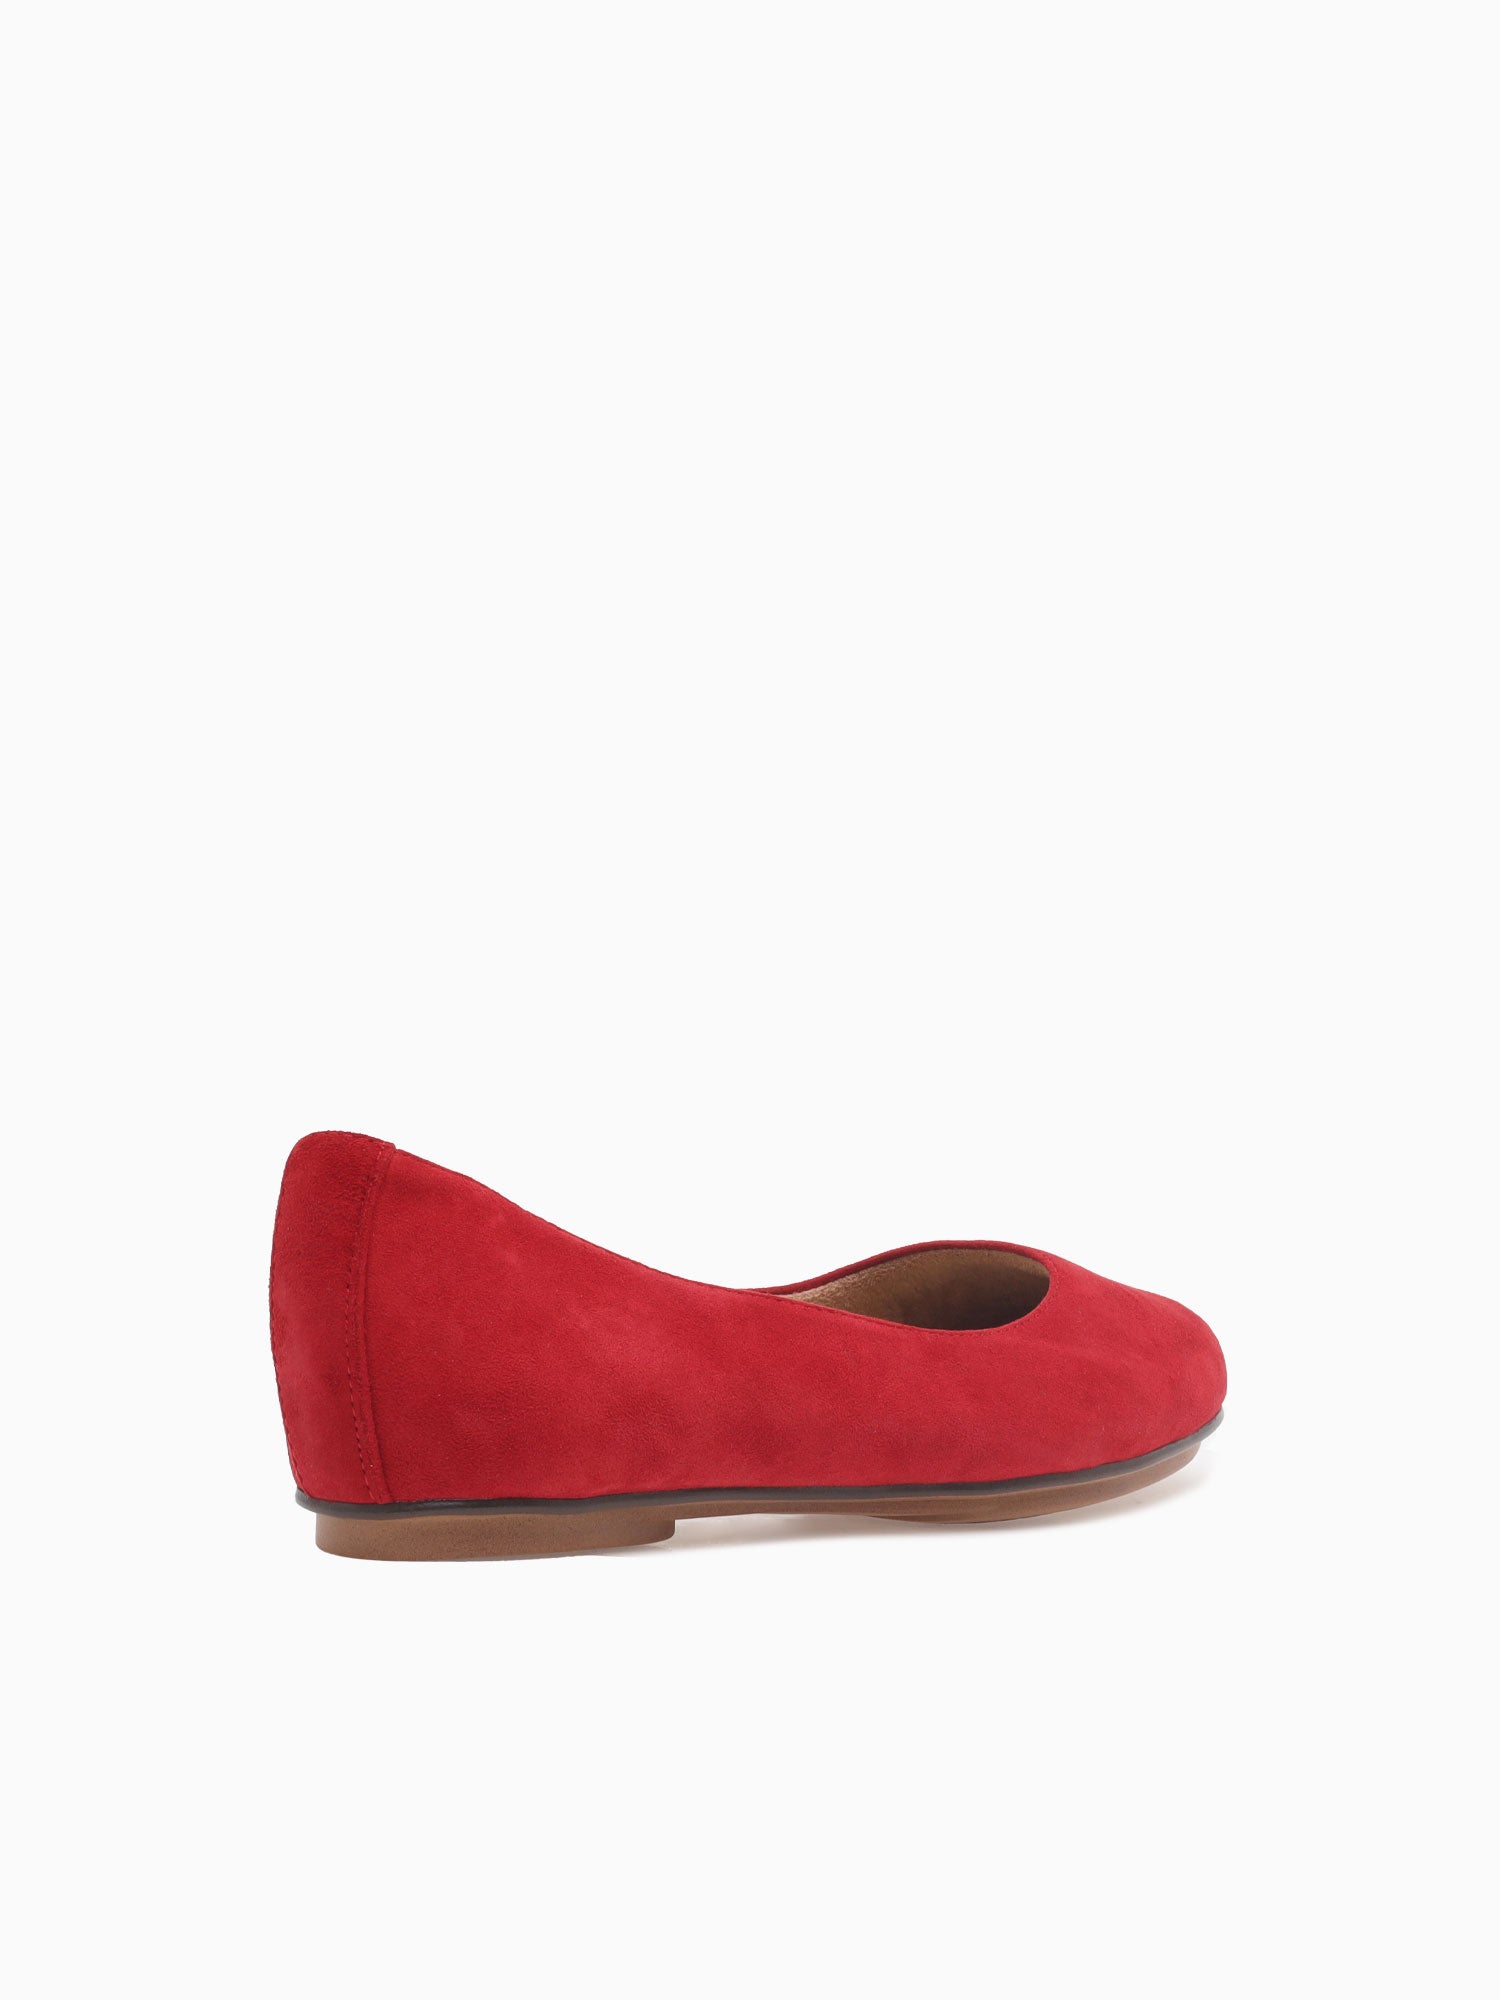 Maxwell Hot Sauce Suede Leather Red / 5 / M